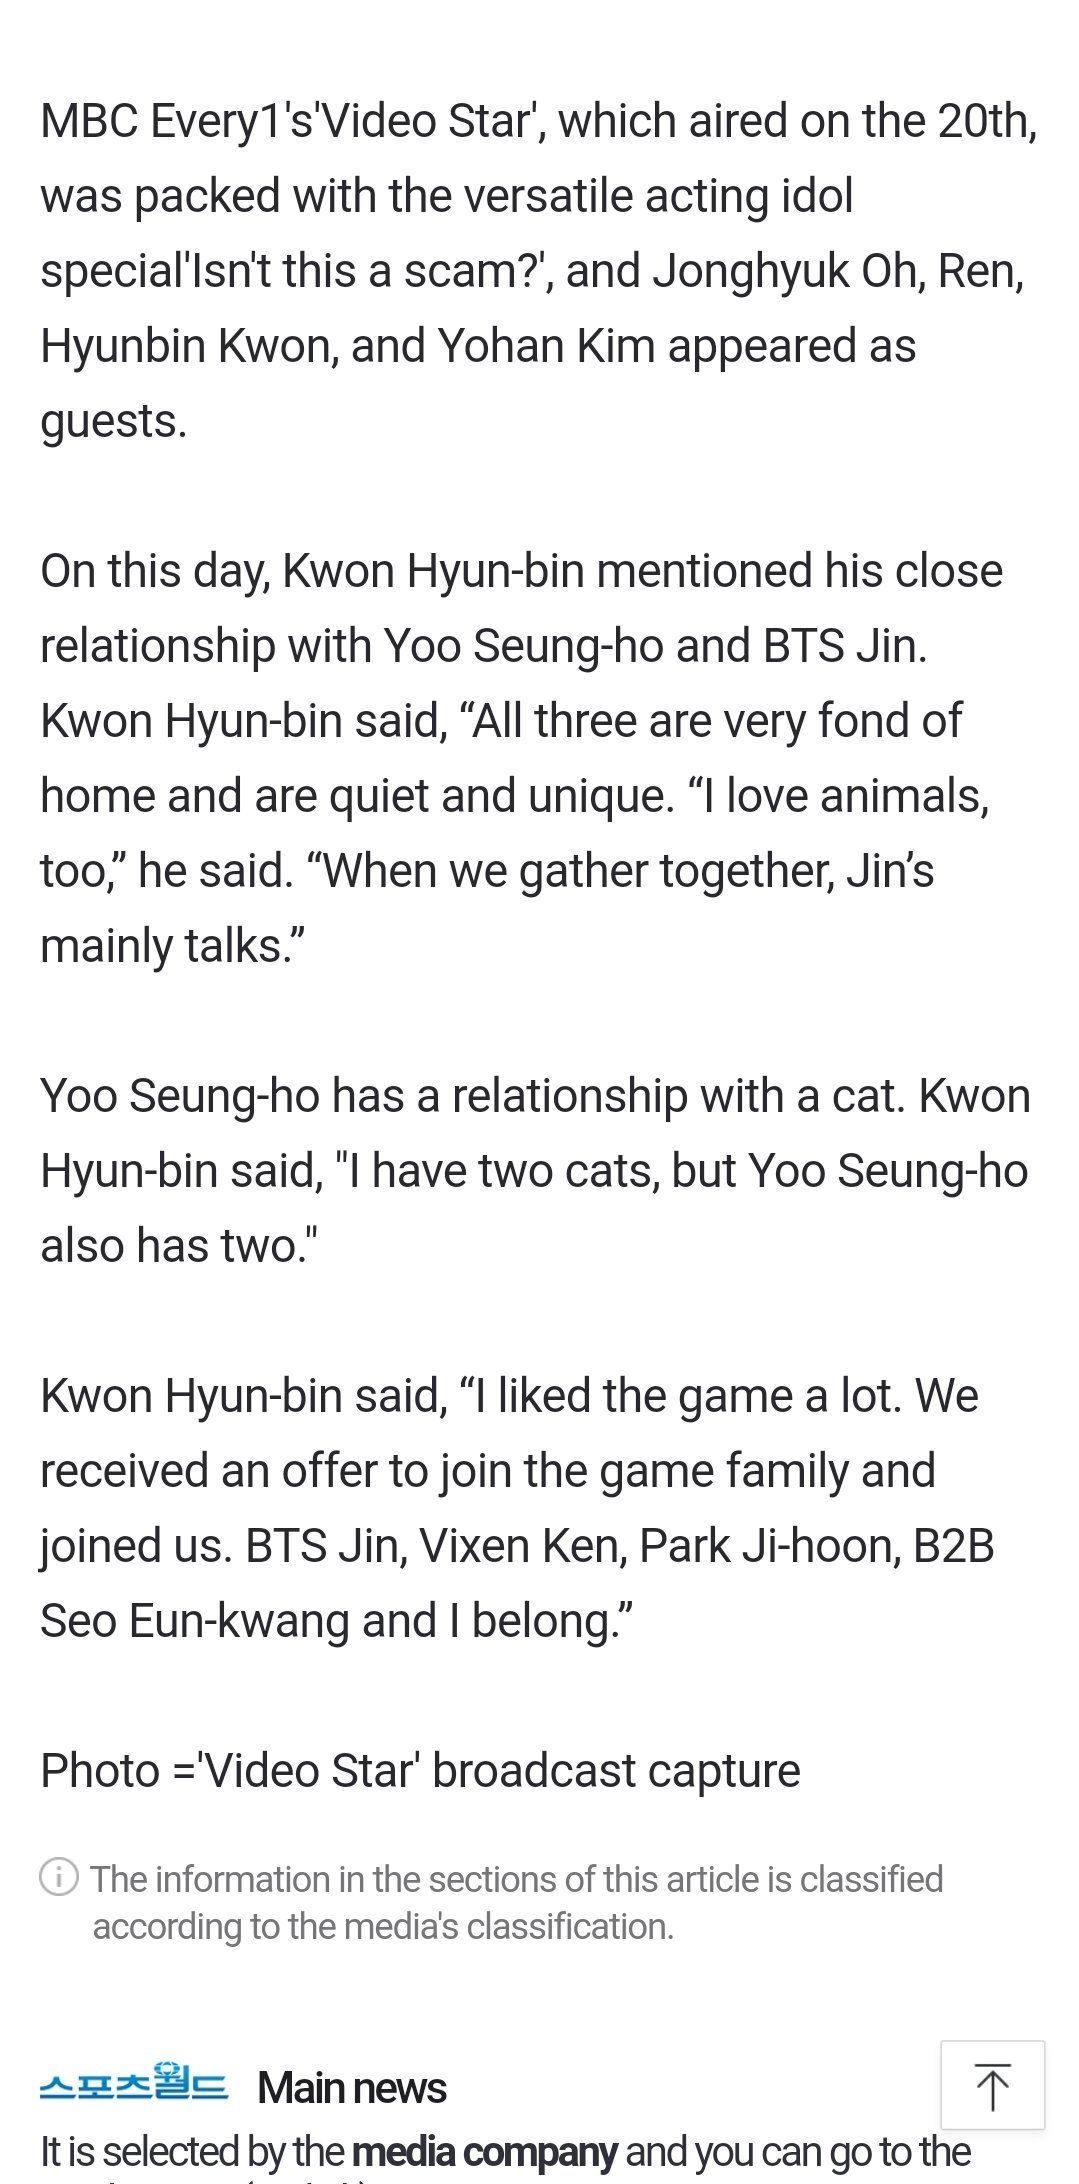 Actor Kwon Hyunbin shares about his close friendship with Kim Seokjin and  Yoo Seunghoo